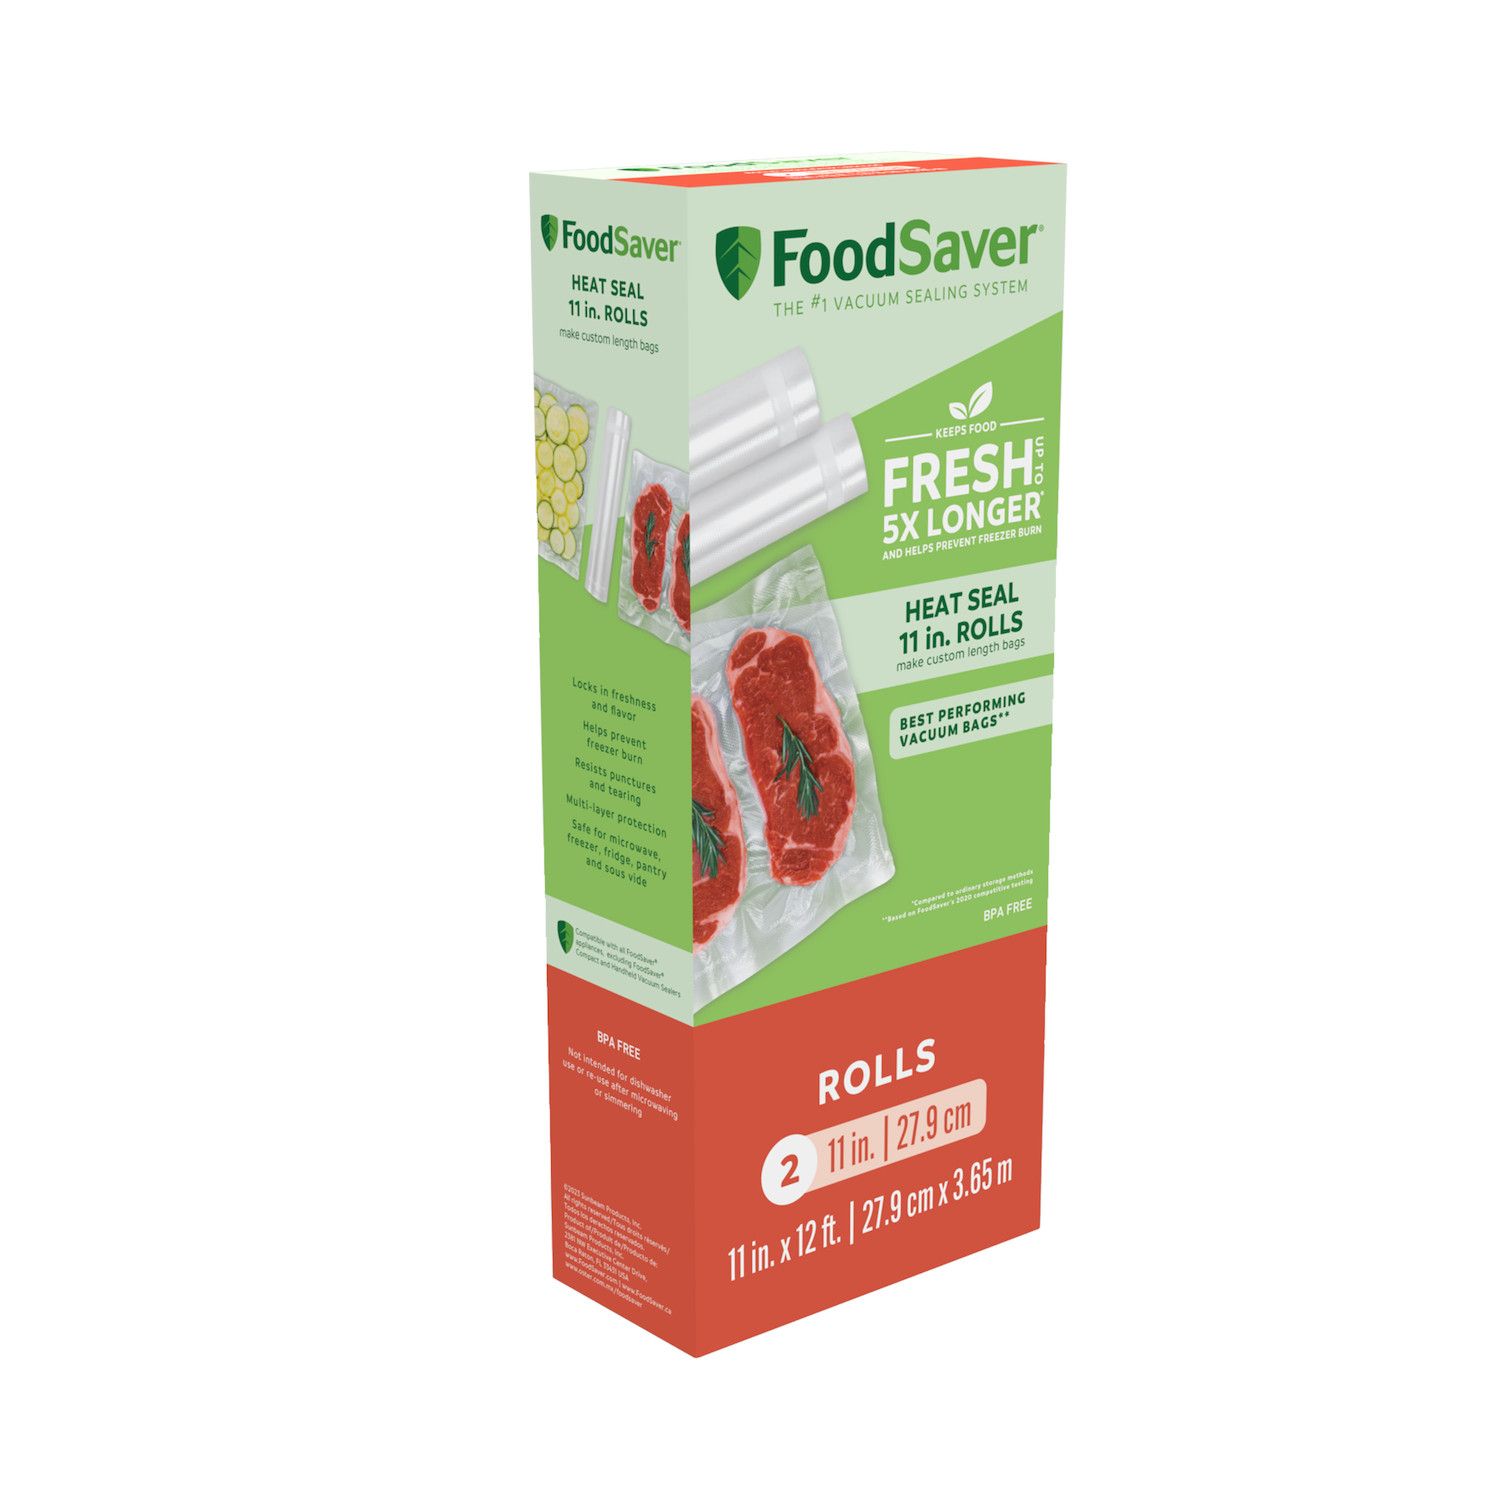 Foodsaver 2116382 Preserve & Marinate Vacuum -Containers,1- 3 Cup and 1- 10 Cup, Clear (Count-2)